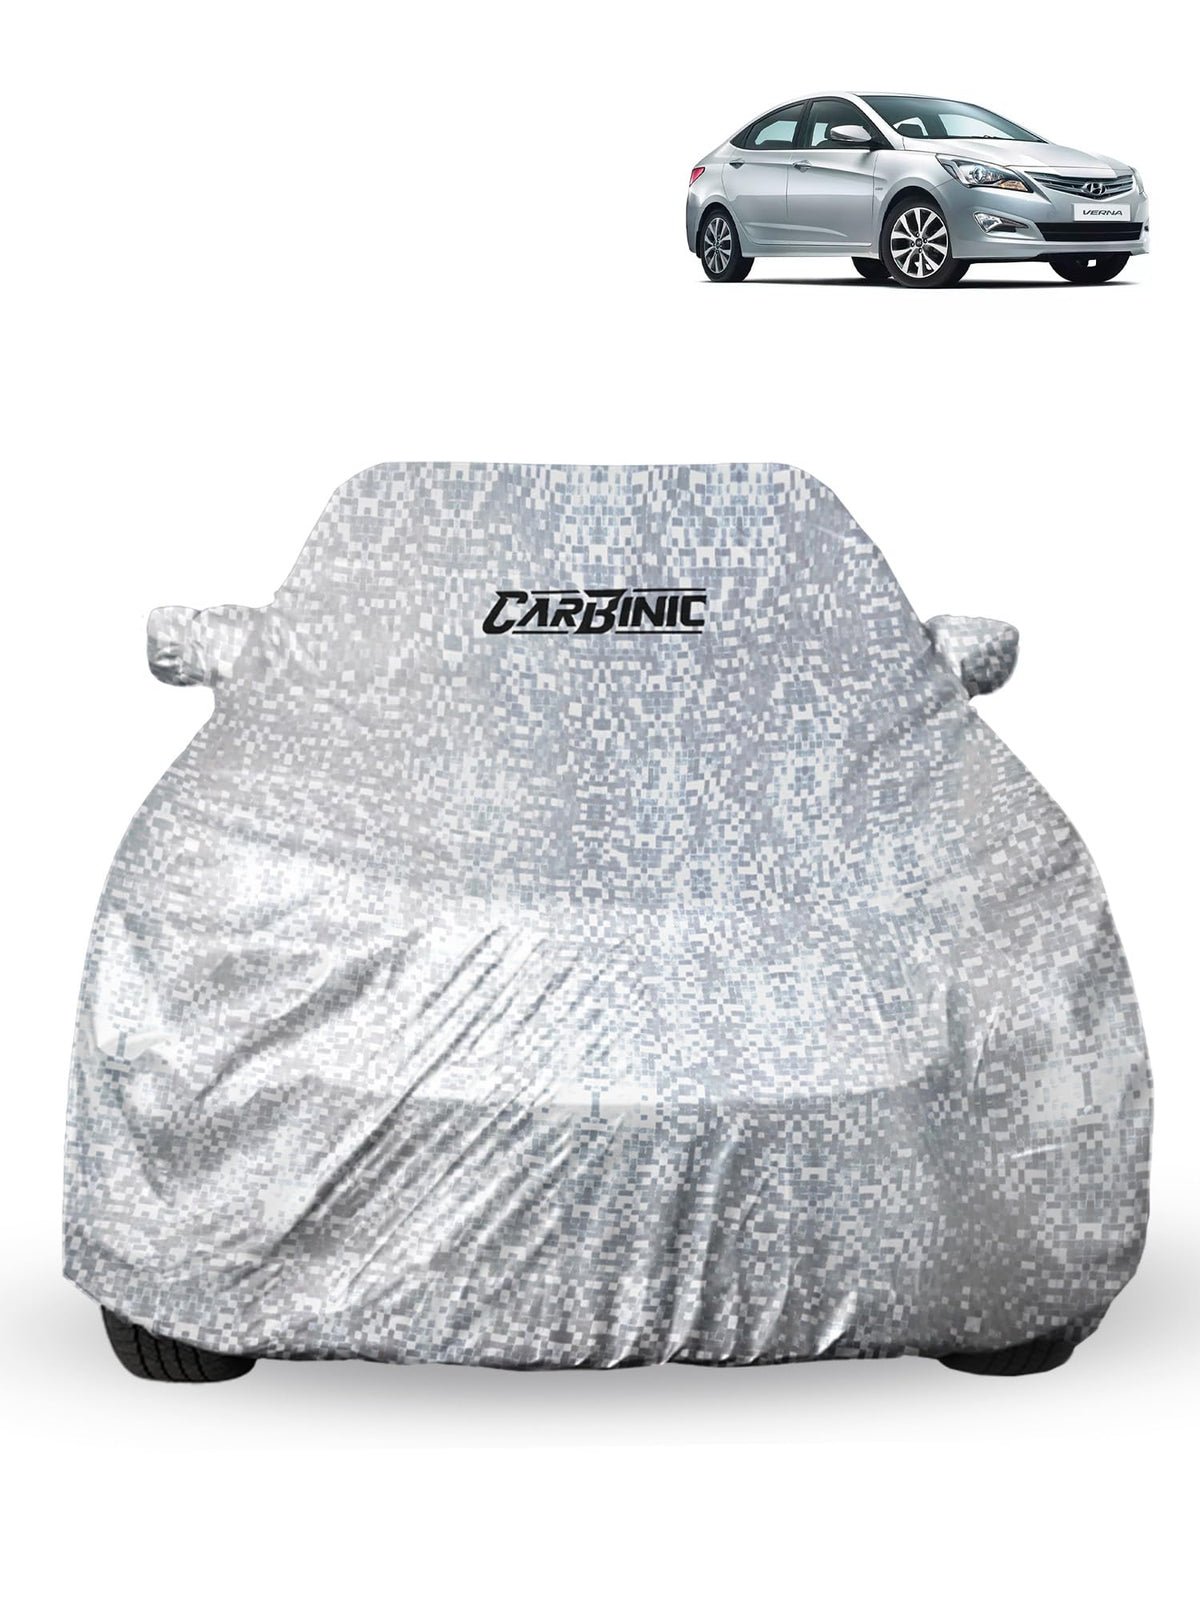 CARBINIC Car Cover for Hyundai Fluidic Verna 4S2016 Waterproof (Tested) and Dustproof Custom Fit UV Heat Resistant Outdoor Protection with Triple Stitched Fully Elastic Surface | Silver with Pockets